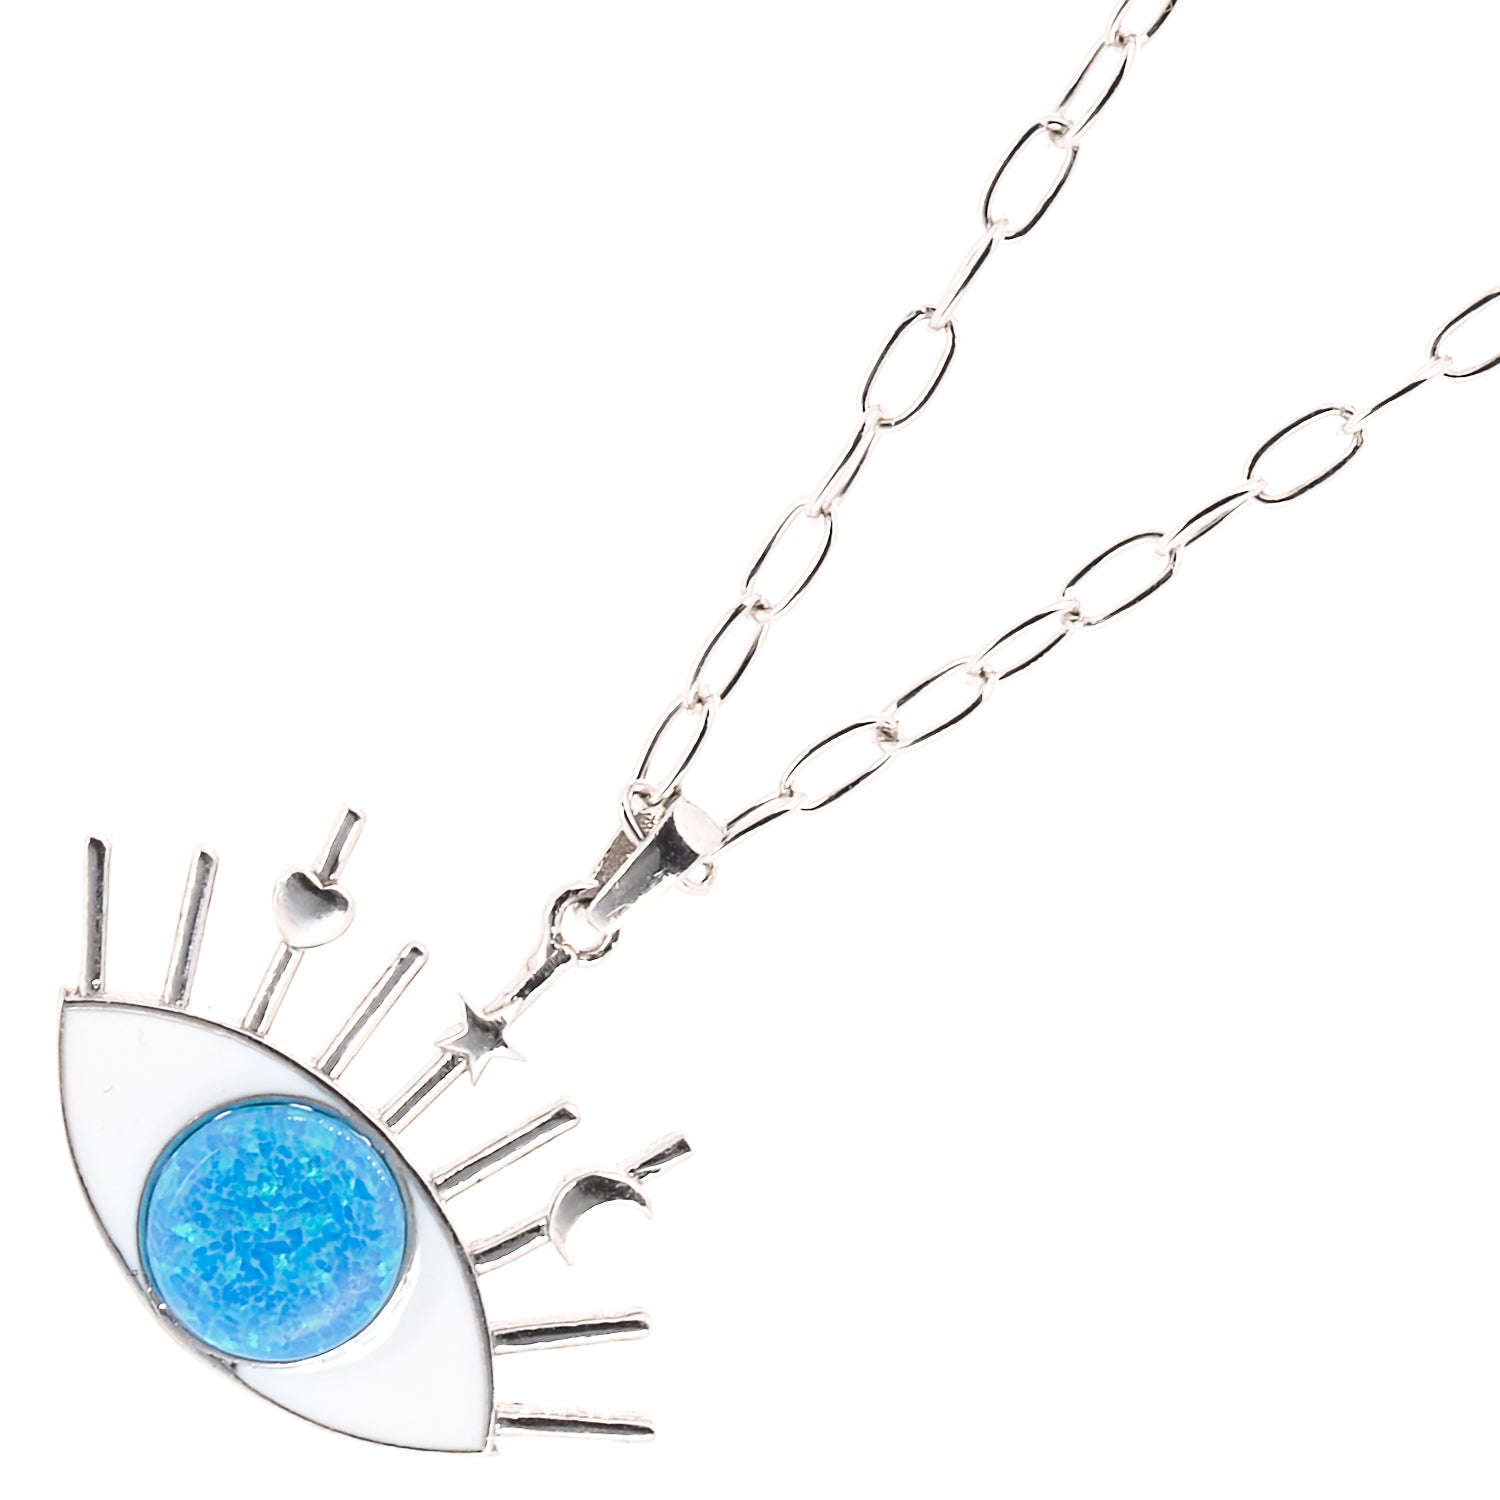 The striking contrast between the white enamel and blue opal on the Evil Eye pendant.